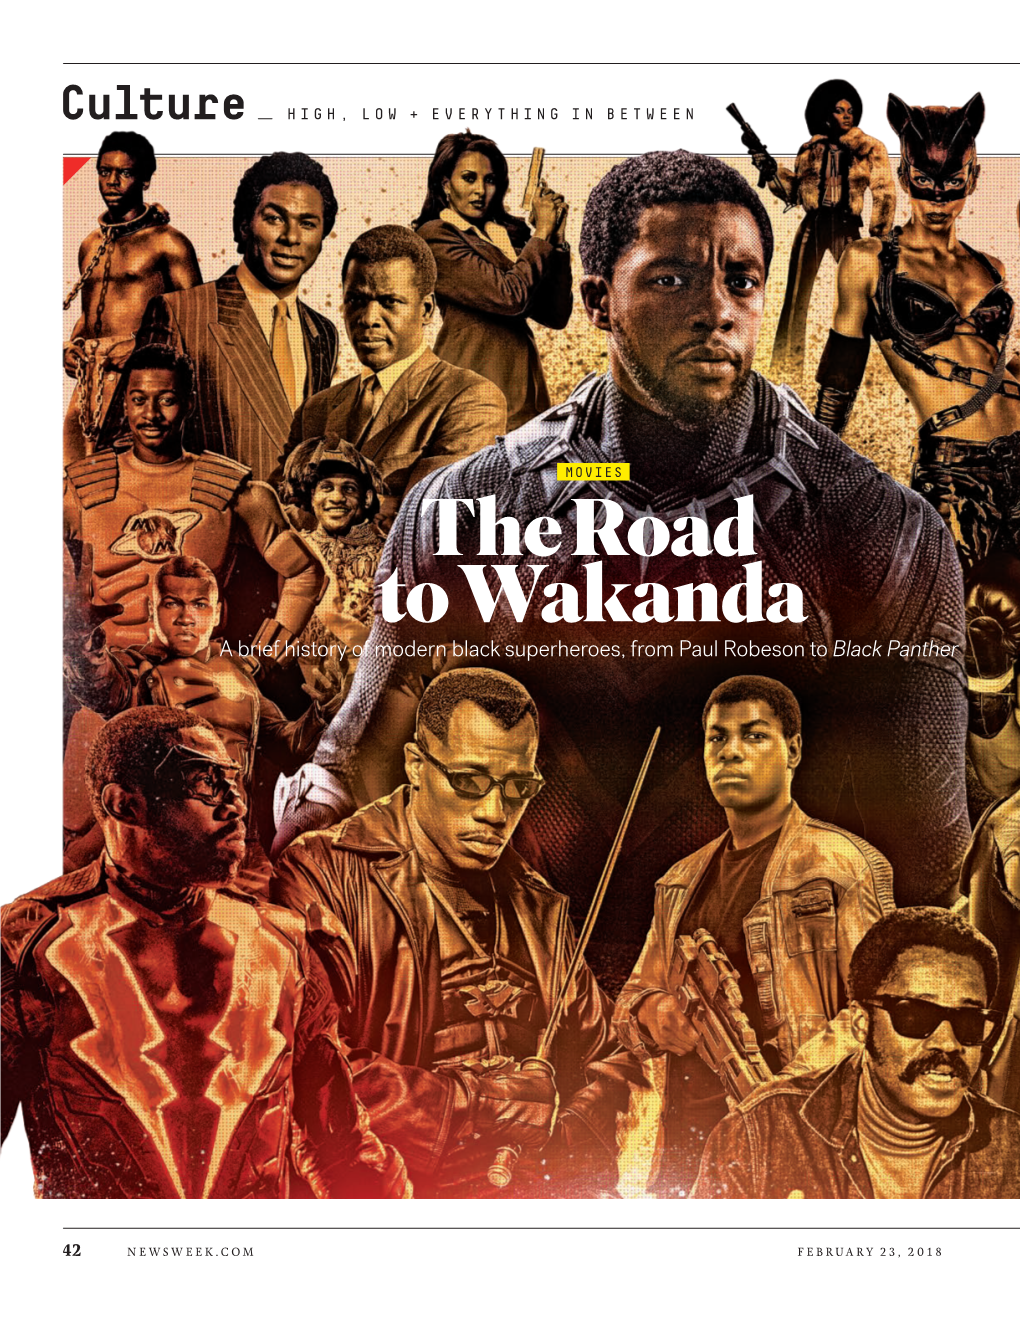 The Road to Wakanda a Brief History of Modern Black Superheroes, from Paul Robeson to Black Panther